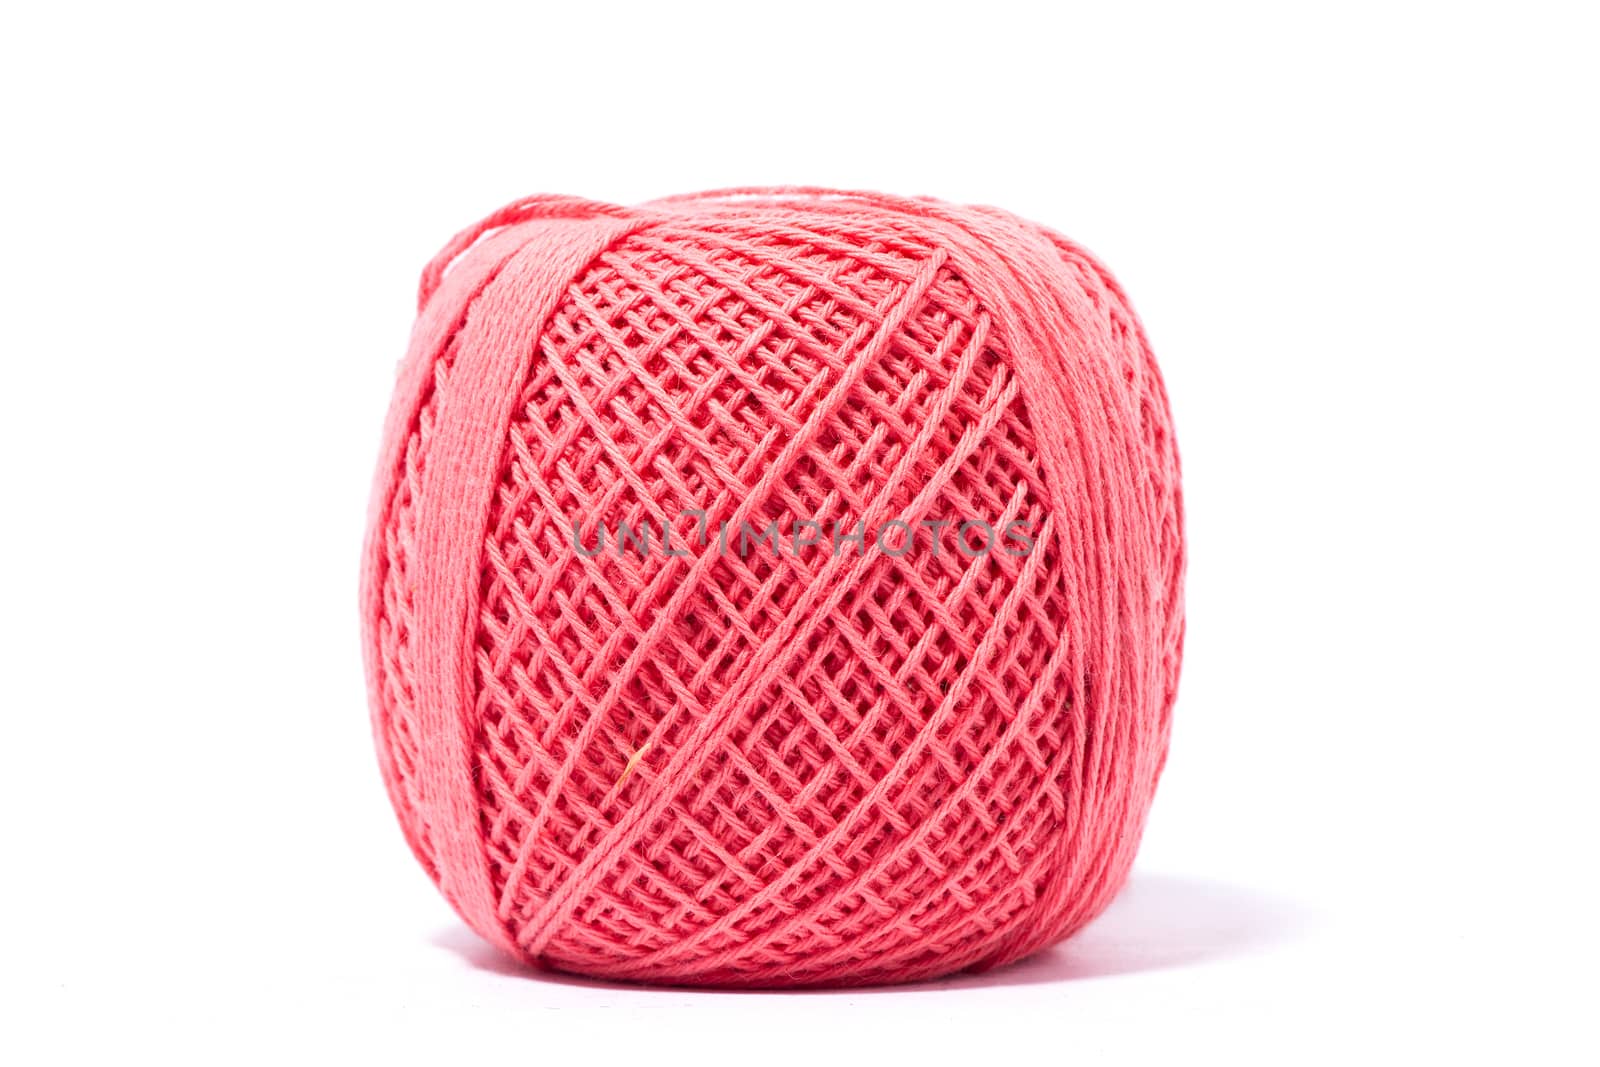 pink ball of yarn for knitting, isolate, homemade handicrafts by kasynets_olena